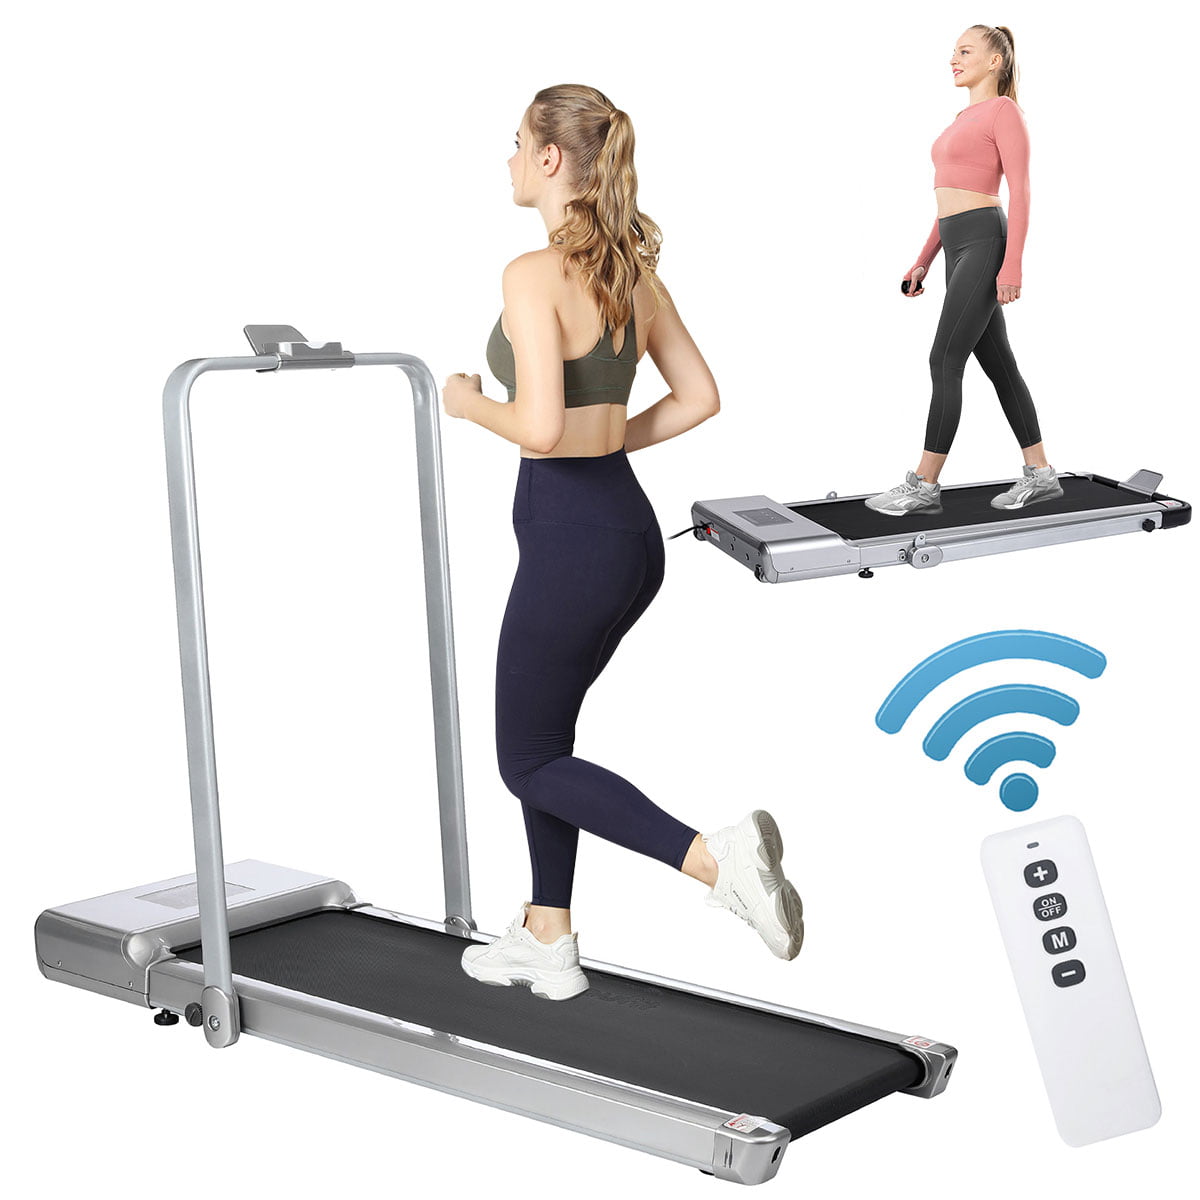 Details about   Under Desk Treadmill 2-in-1 Pad Folding Electric Treadmill Remote Control_Compac 